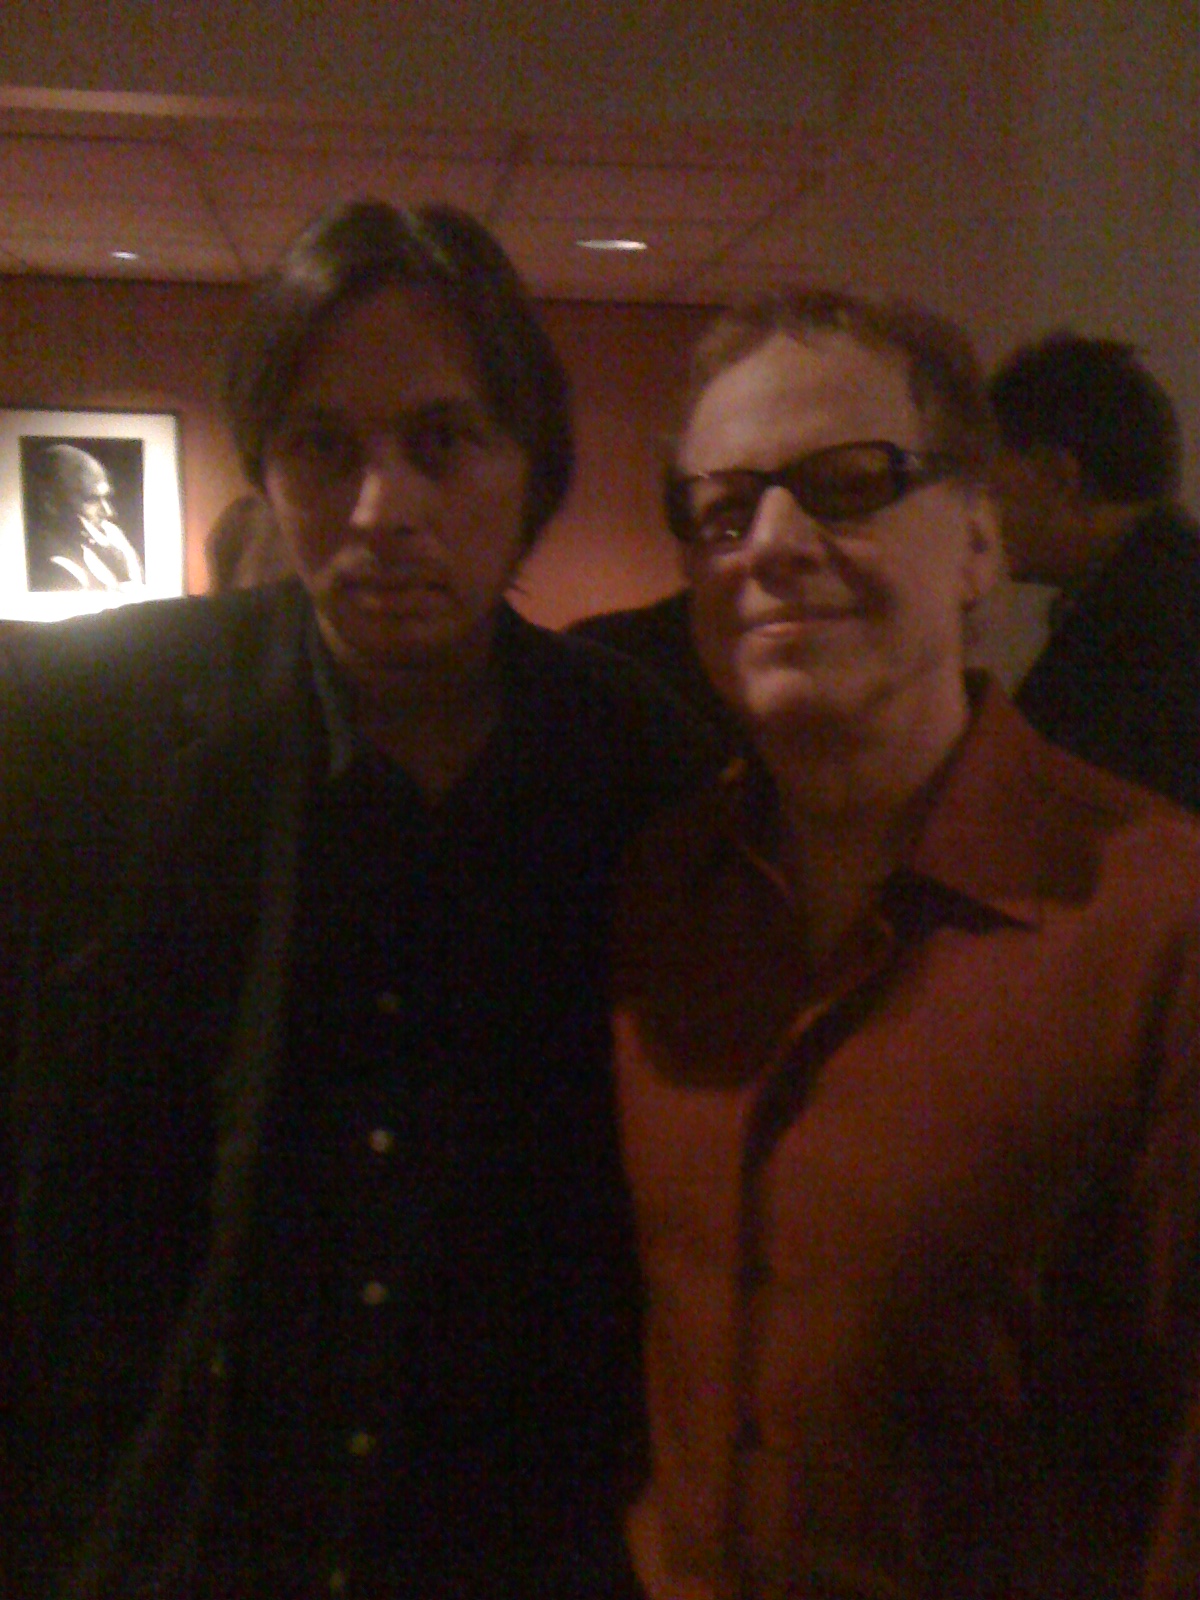 Gregoer Boru and Danny Elfman at an AMPAS event for Silver Linings Playbook.